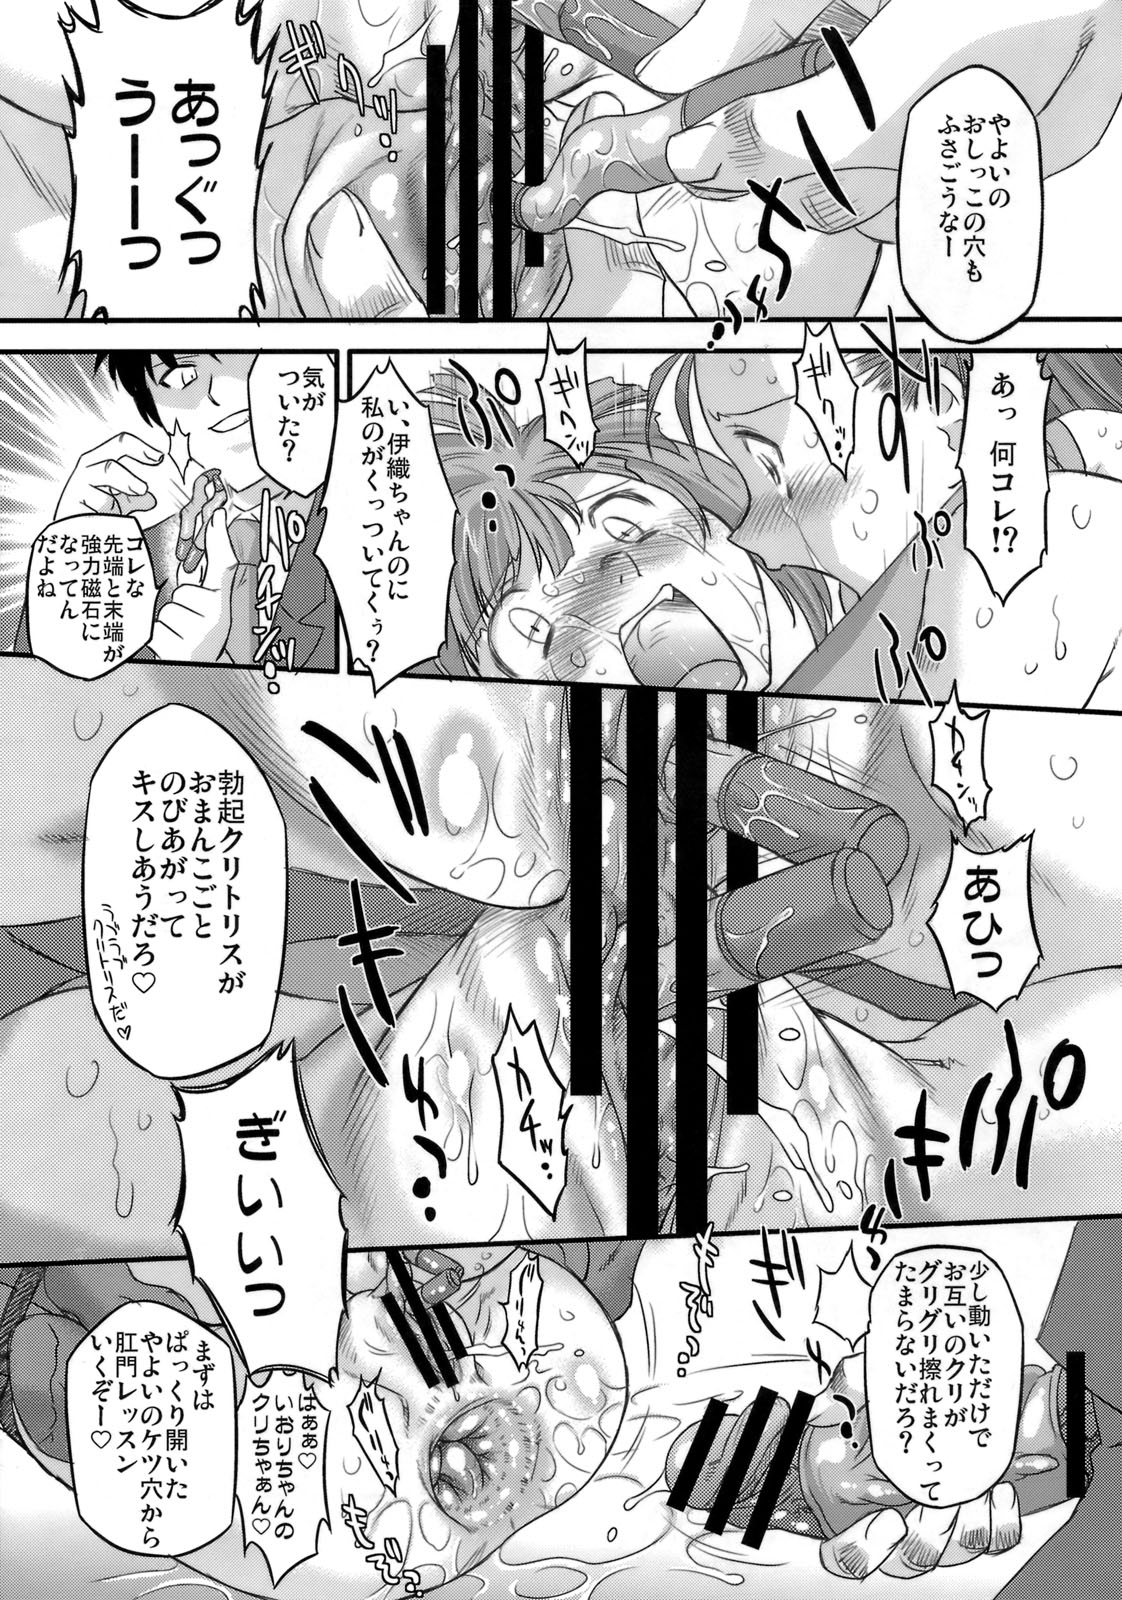 (C77) [Ohtado (Oota Takeshi)] Sweet Produce! SP (THE iDOLM@STER) page 22 full